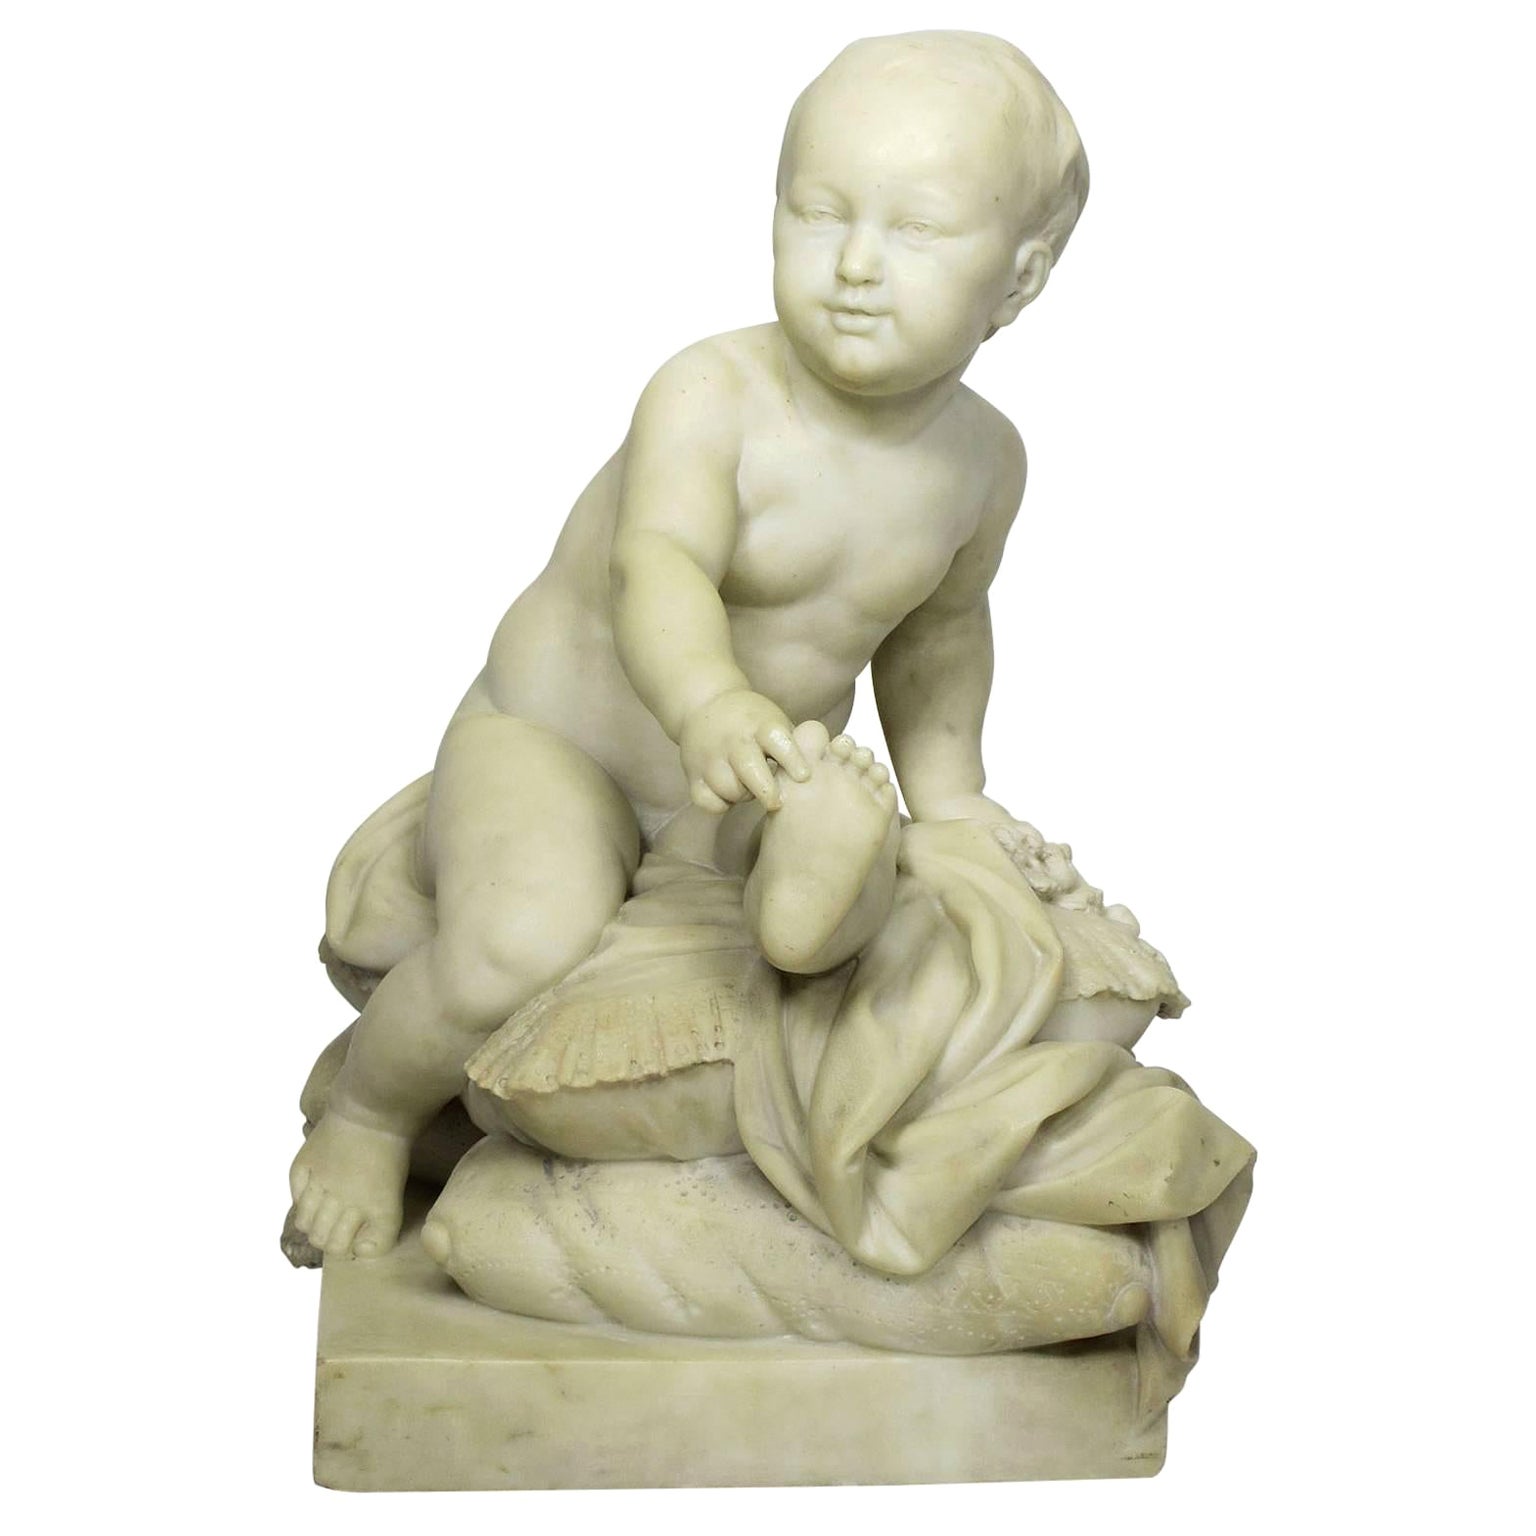 French 19th Century Carved Marble Sculpture of a Young Boy Prince on a Pillow For Sale